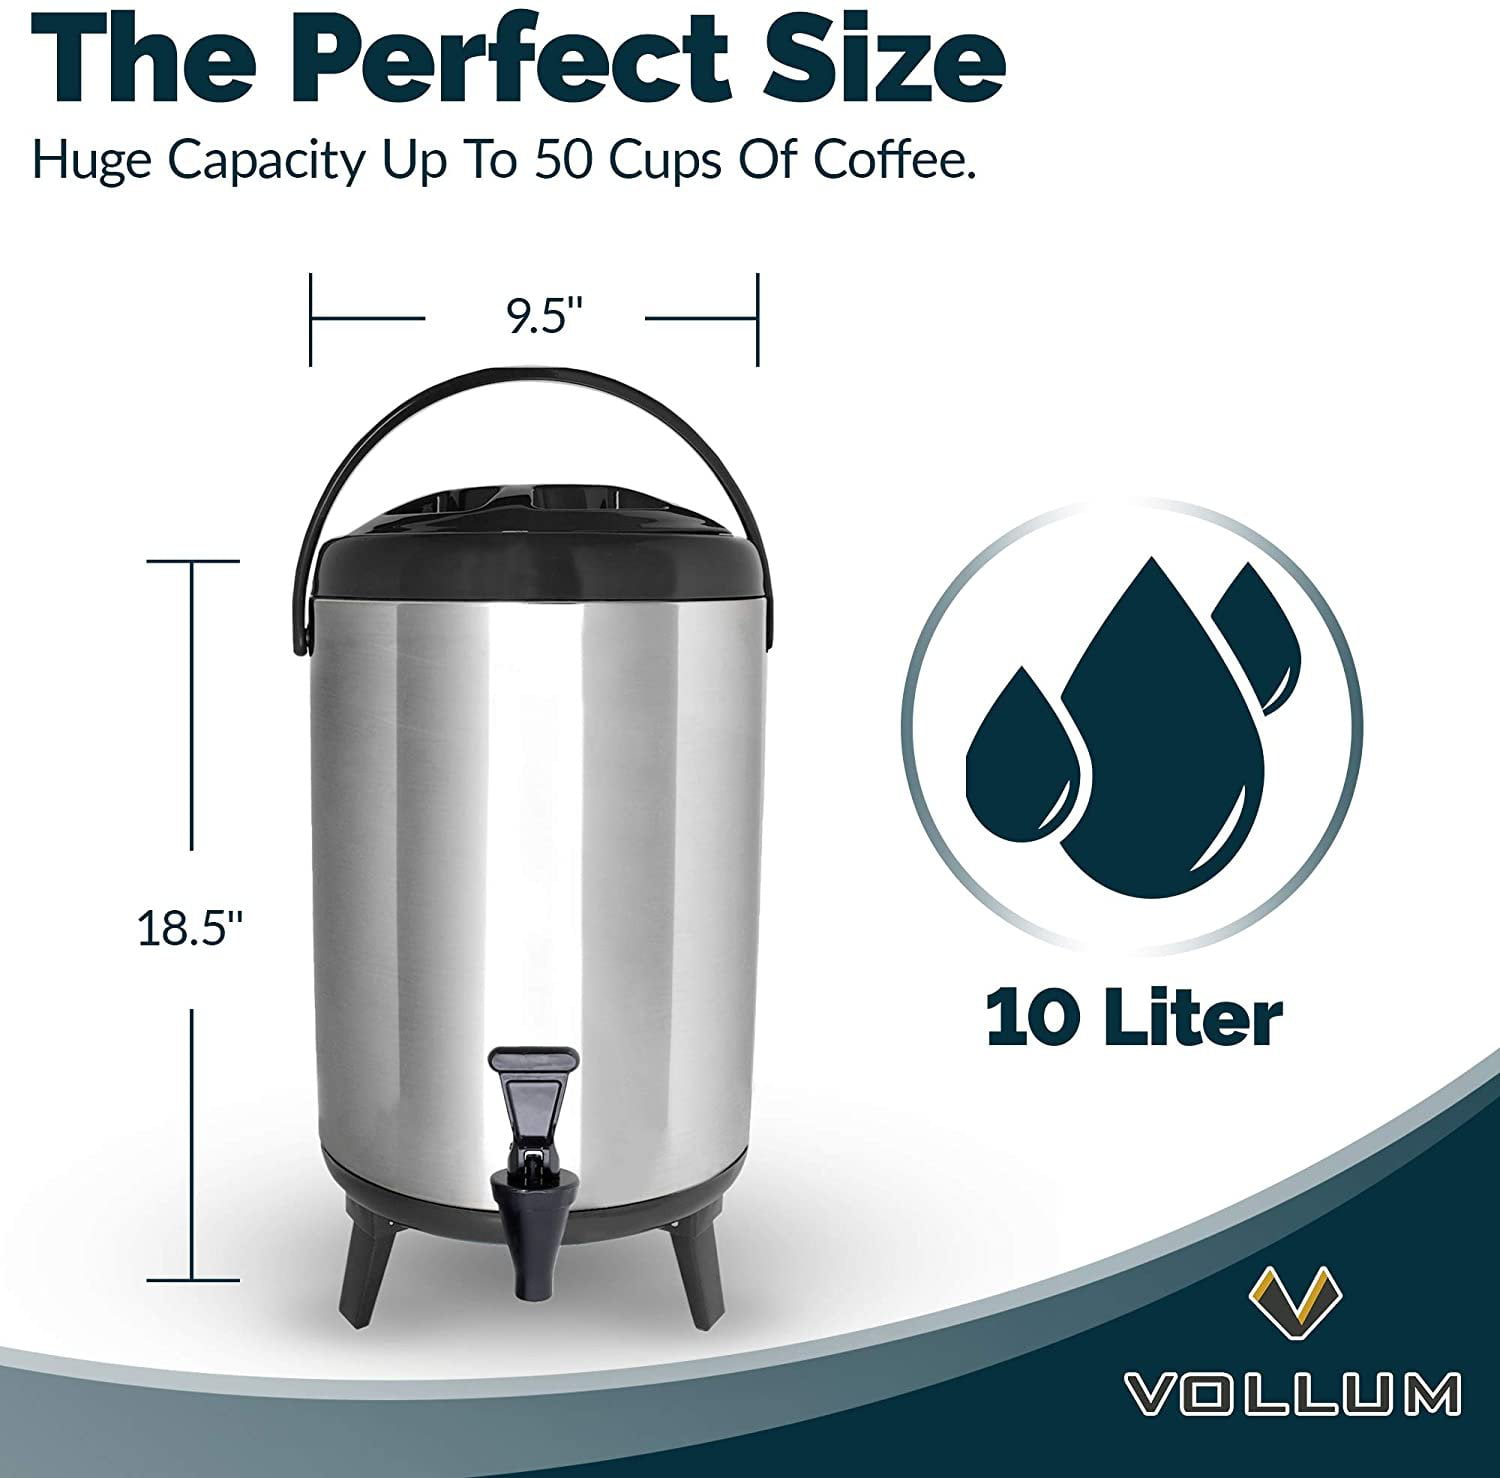 Hot Beverage Dispenser- Extra Large, 88 liters (23 gal). All Stainless  Steel